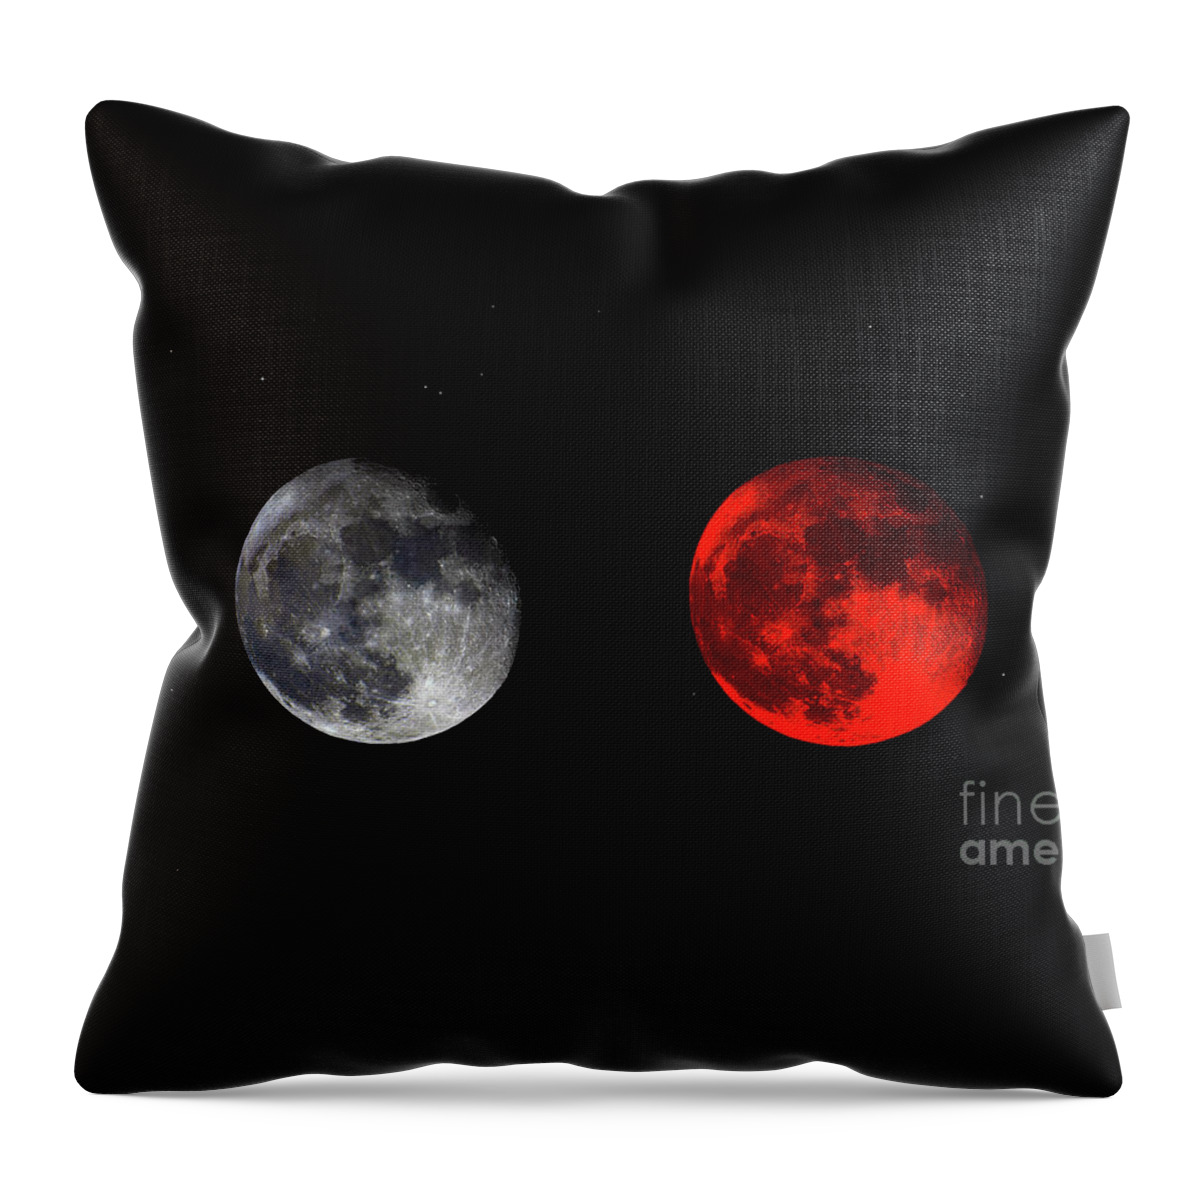 Bloodred Wolf Moon Throw Pillow featuring the photograph Blood Red Wolf Supermoon Eclipse Series 873g by Ricardos Creations